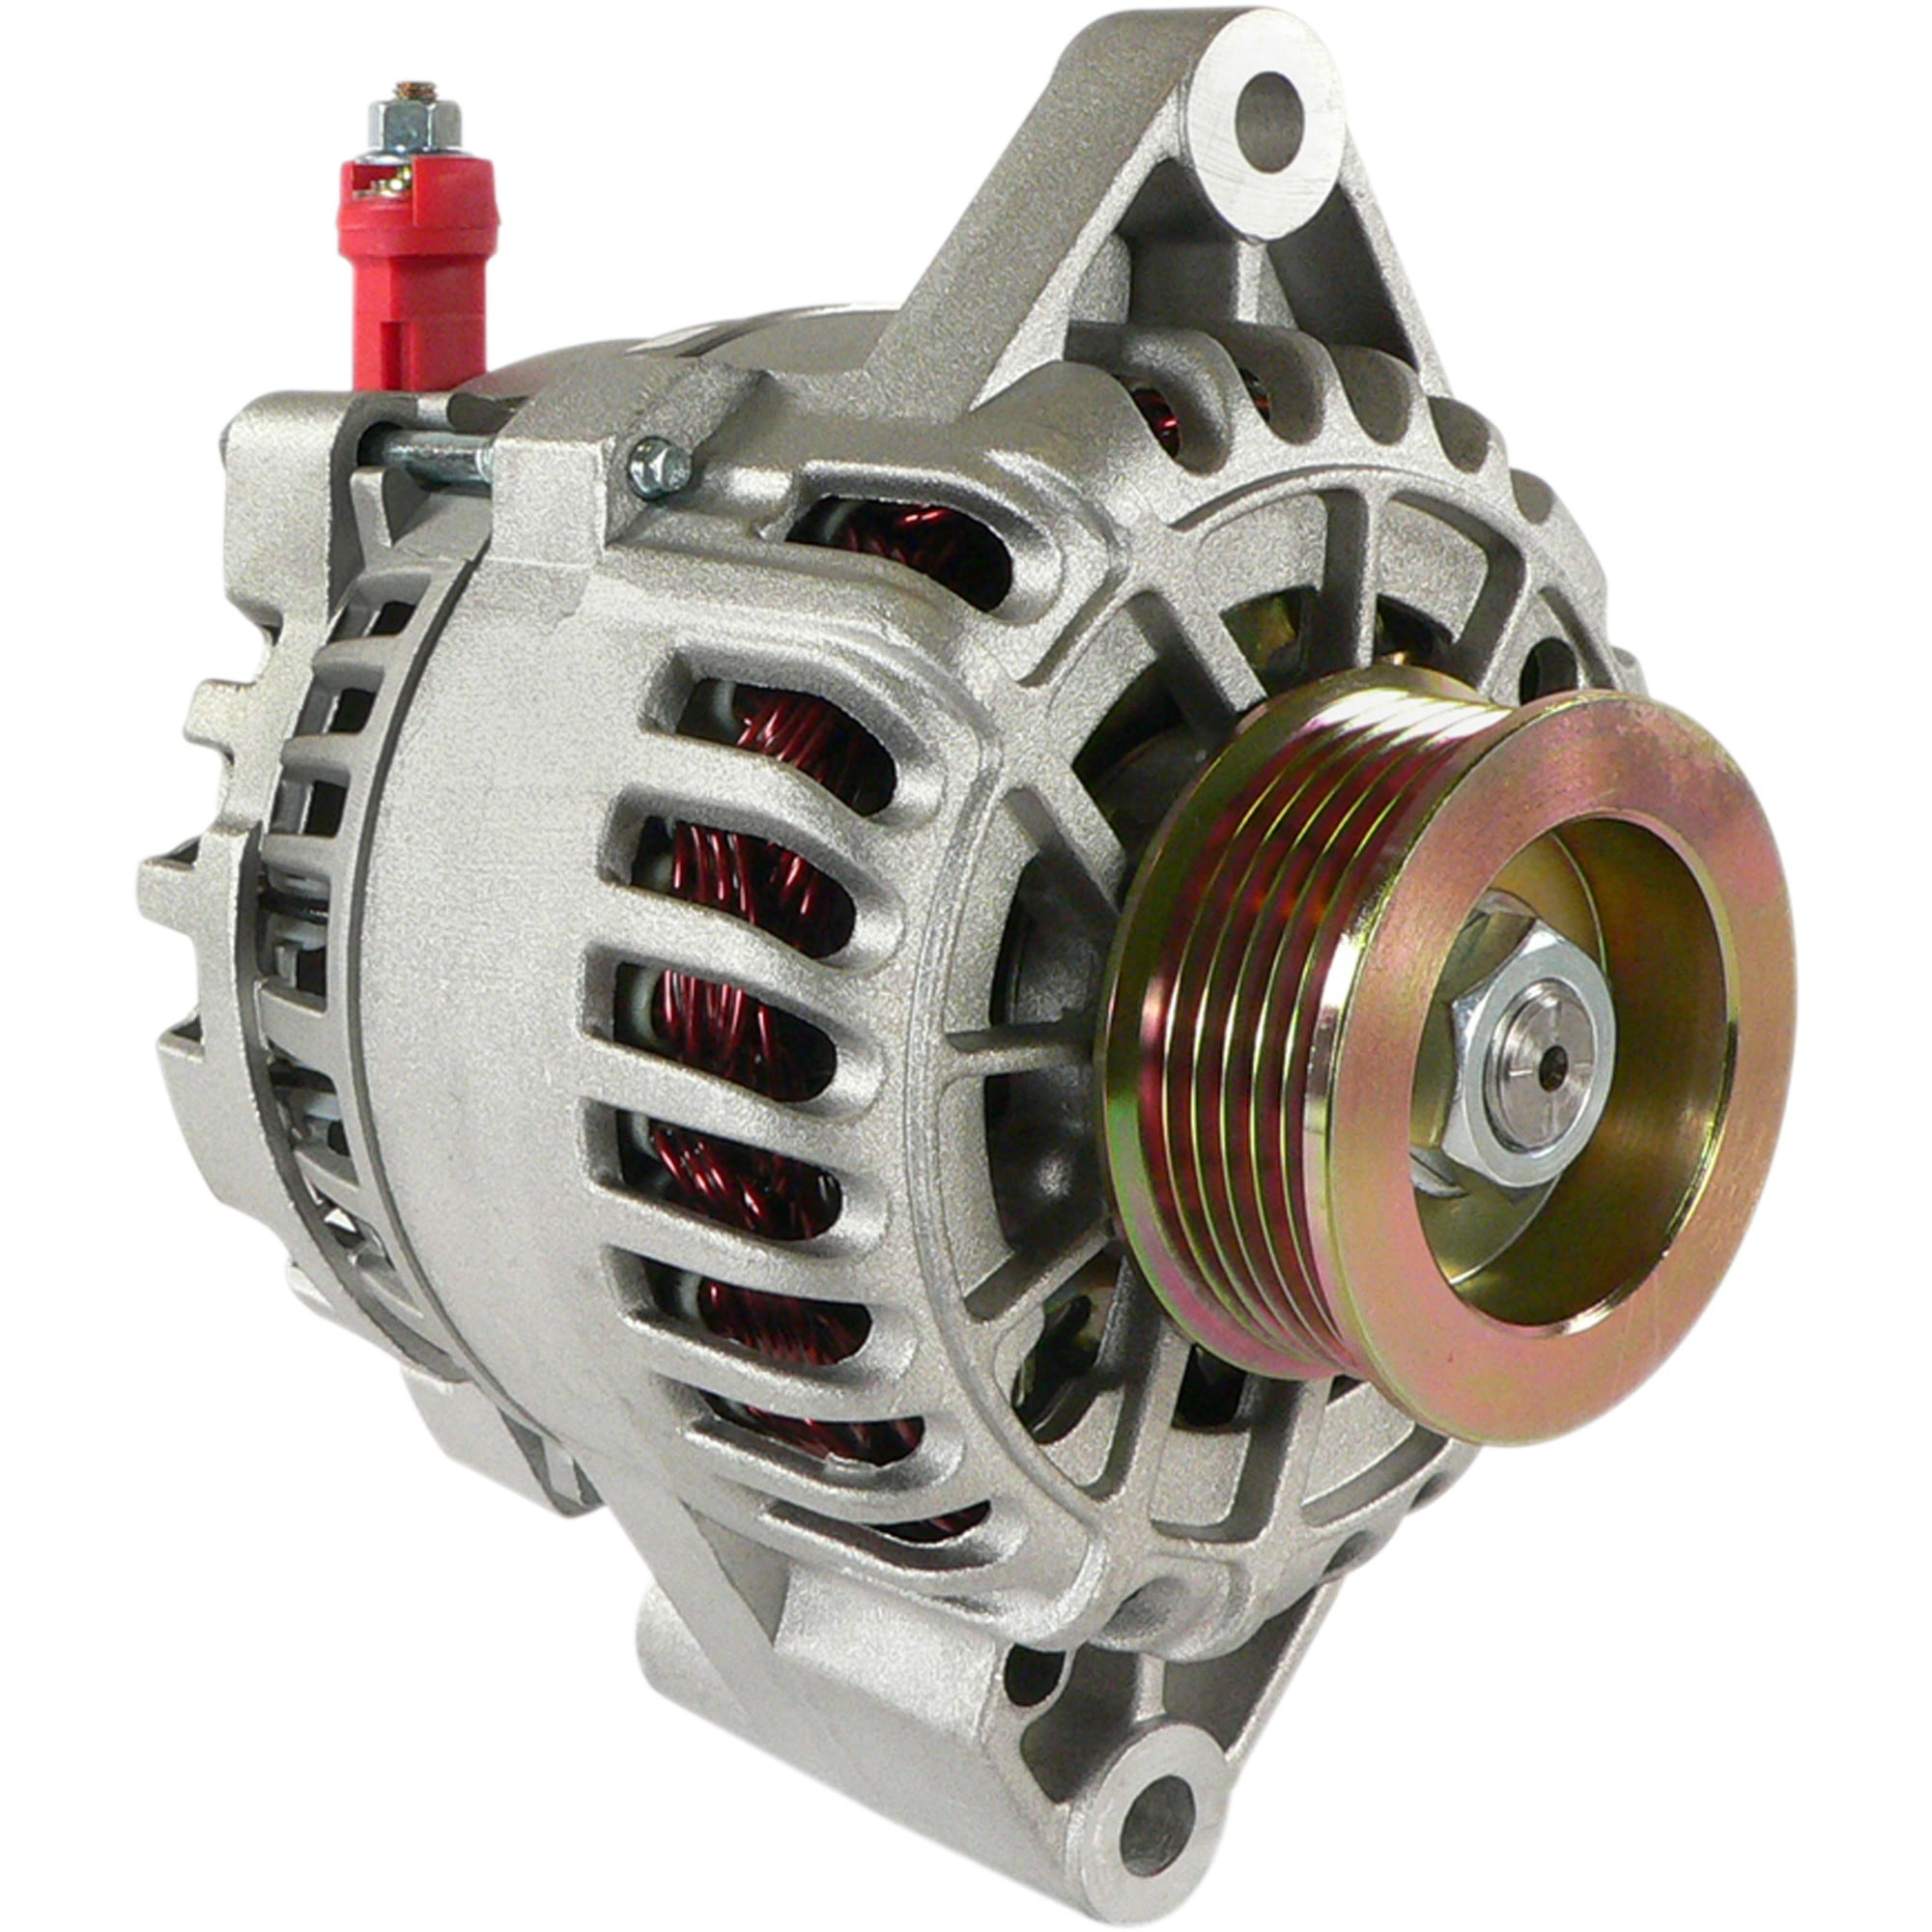 200 AMP 8266 Alternator Ford Mustang V6 01-04 High Output Performance HD NEW